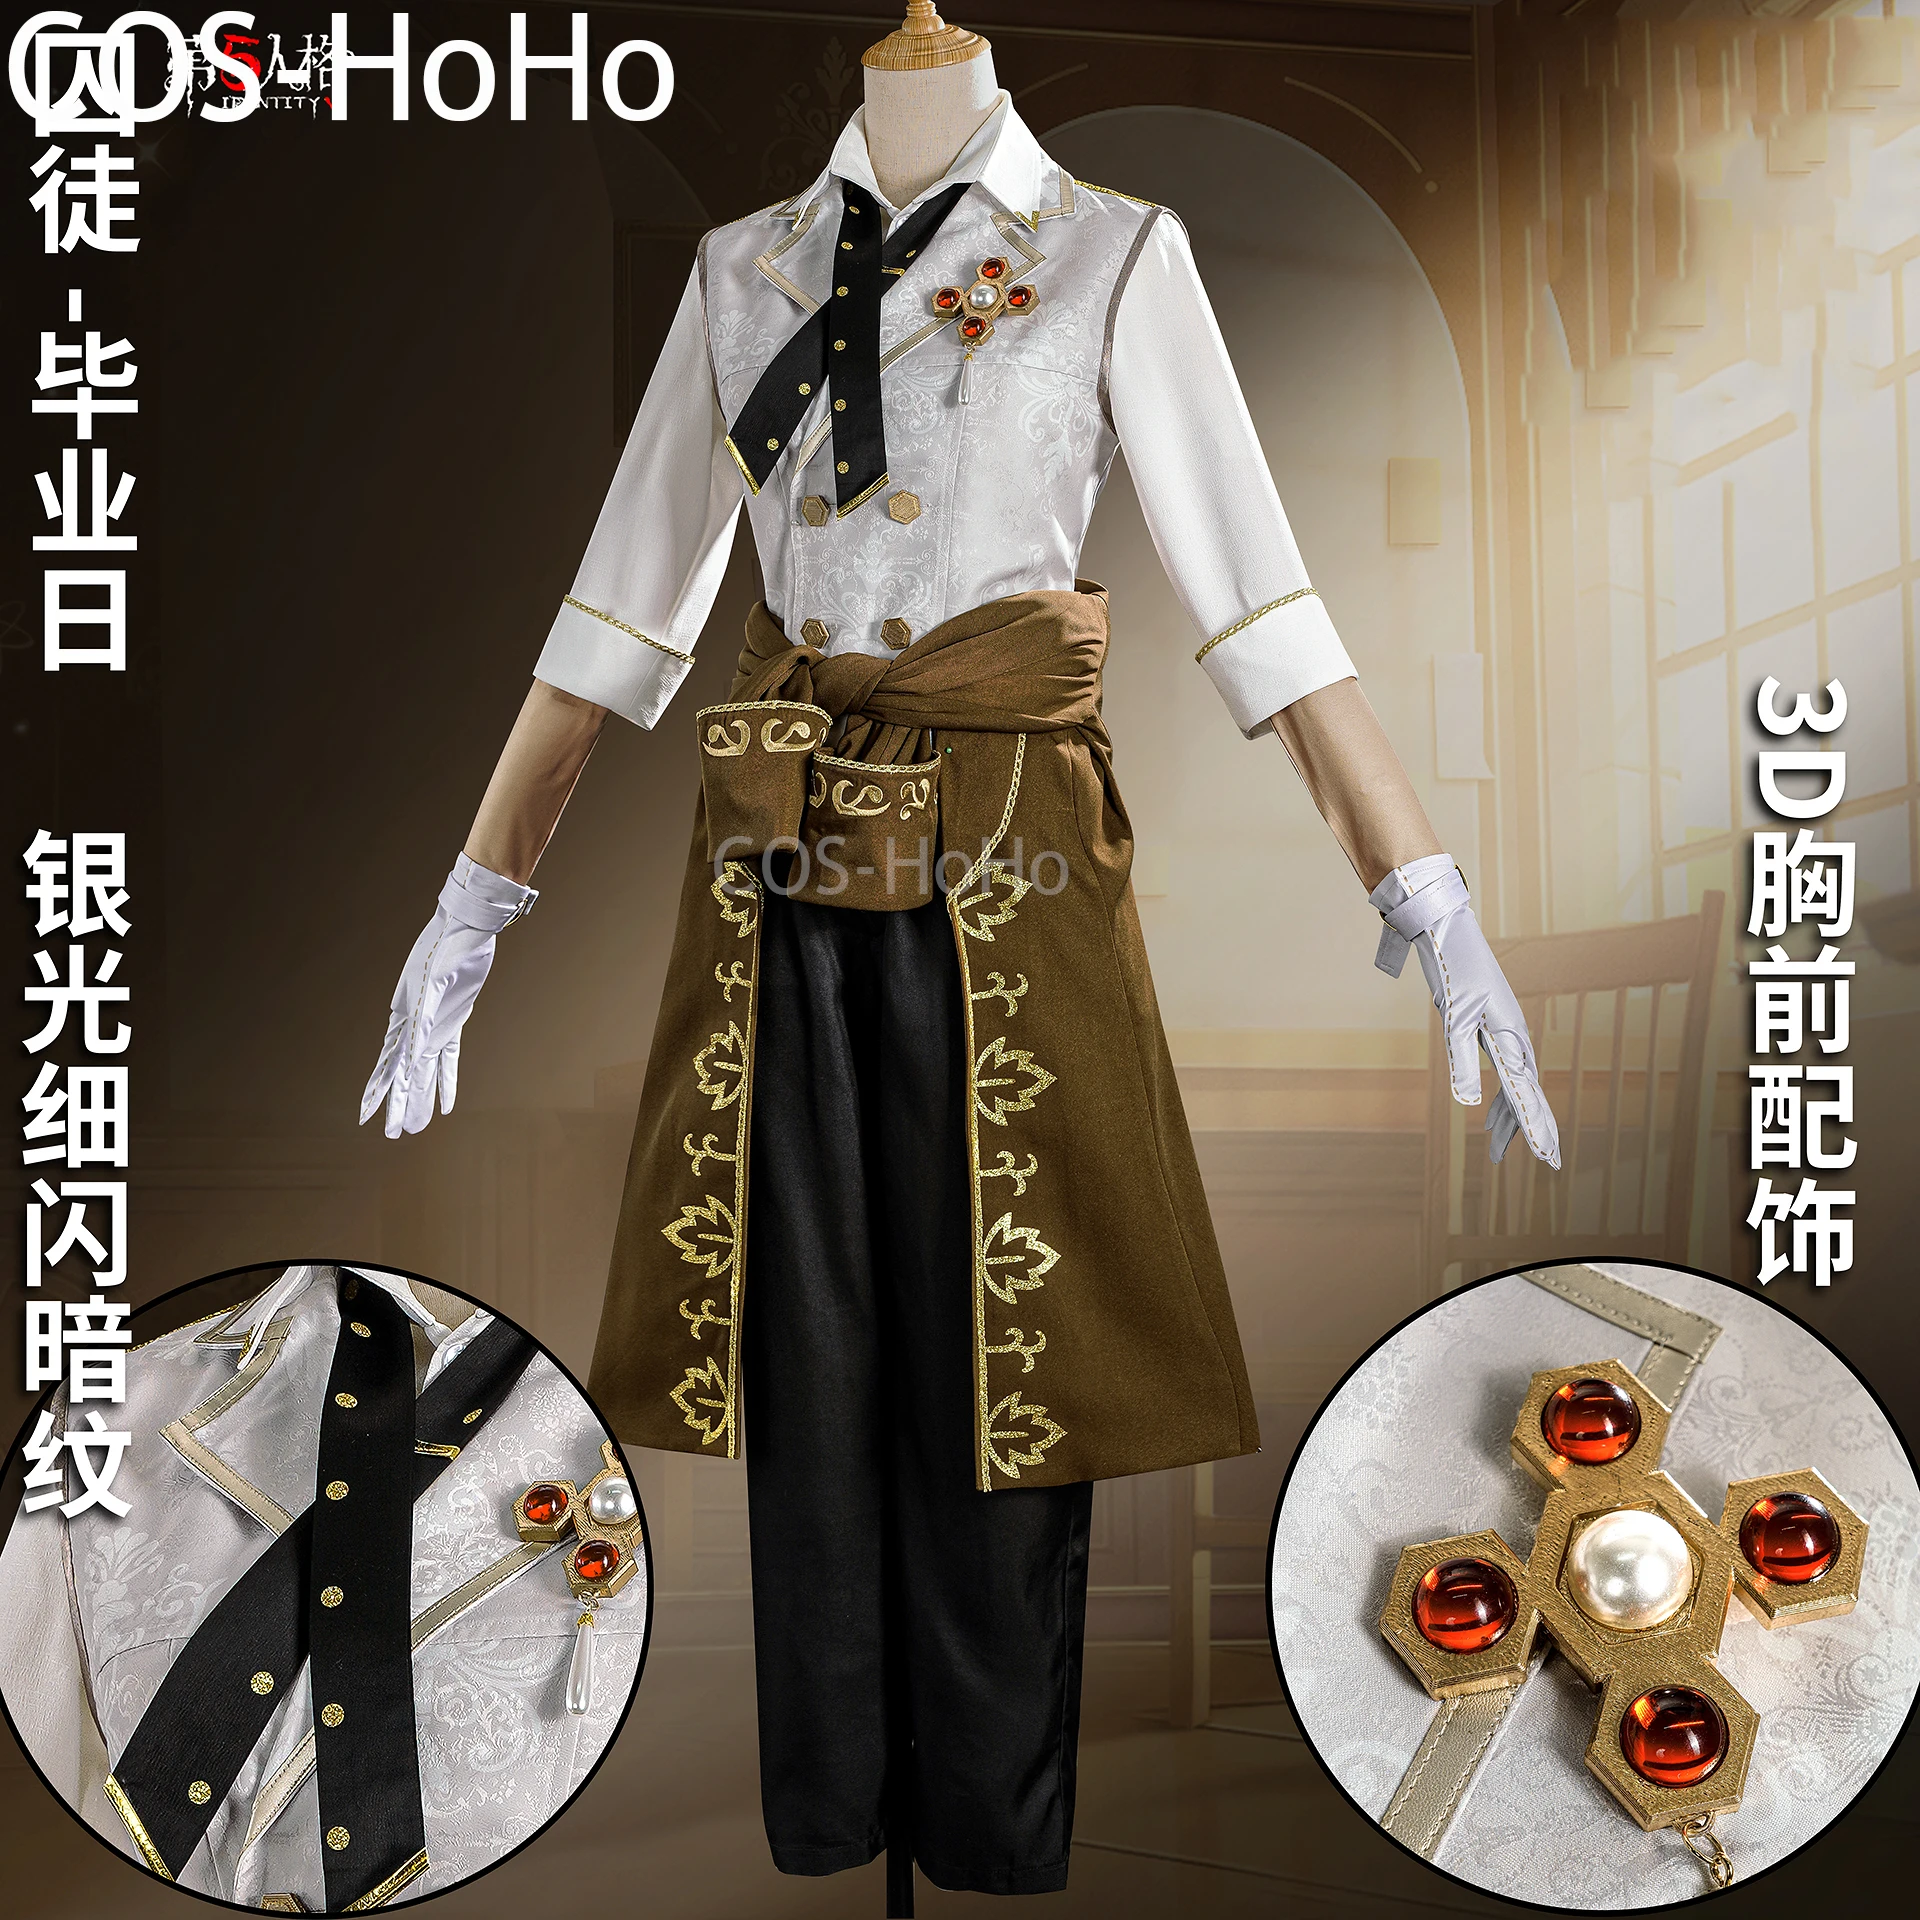 

COS-HoHo Identity V Luca Balsa Prisoner Graduation Day QiZhen Fashion Game Suit Cosplay Costume Halloween Party Role Play Outfit